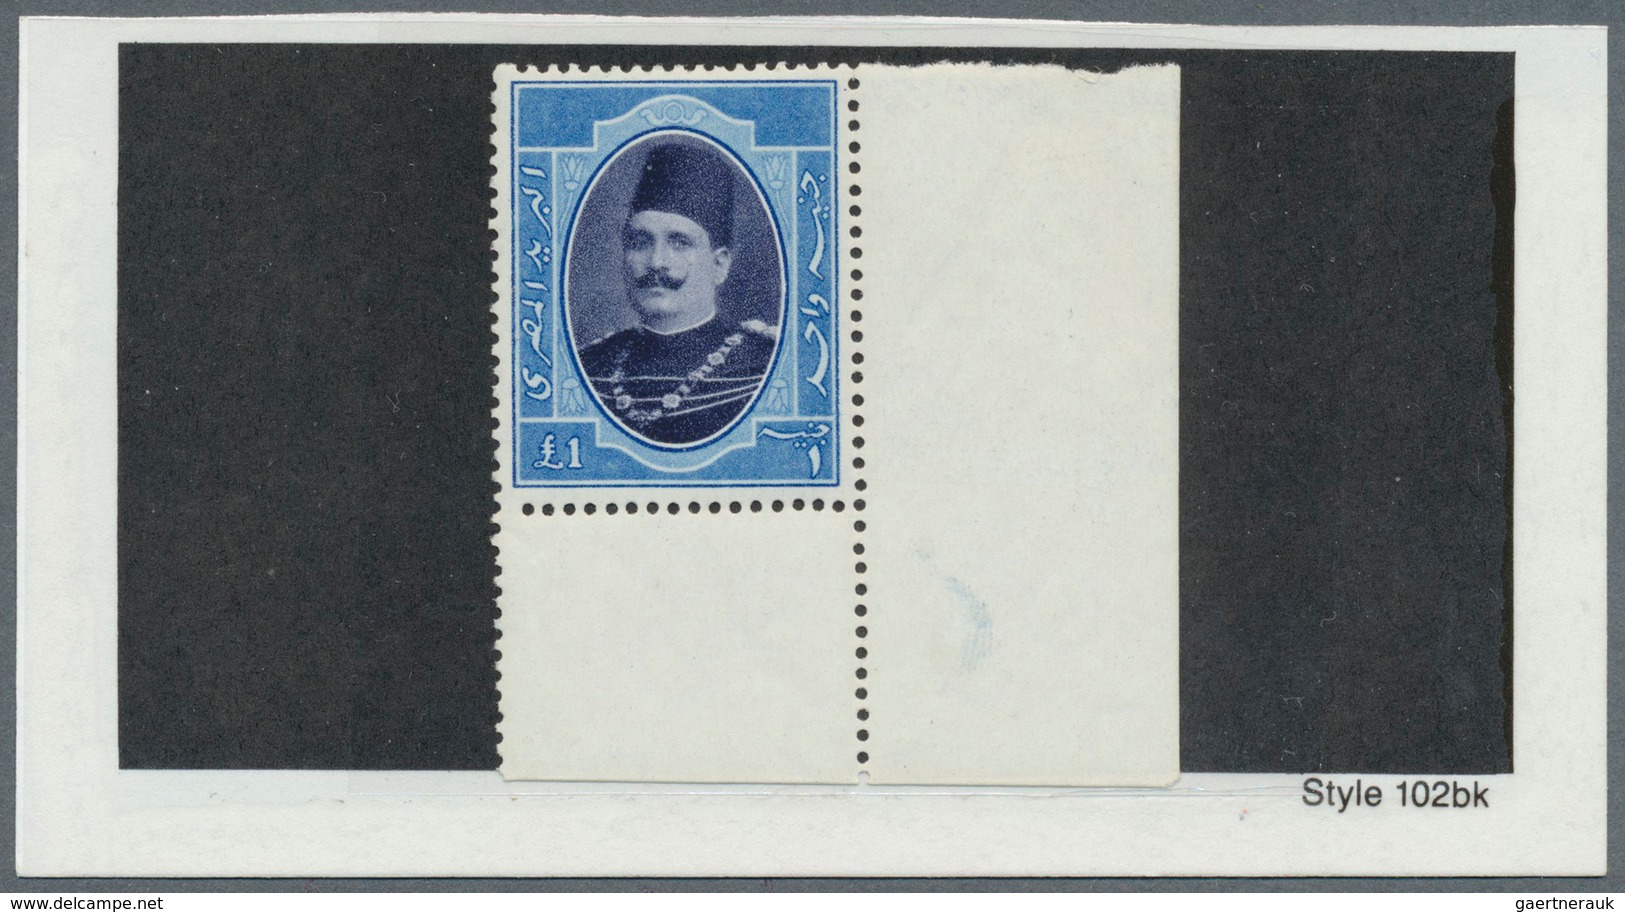 Ägypten: 1866-2015, Comprehensive and specialized collection of stamps, souvenir sheets, FDCs and co